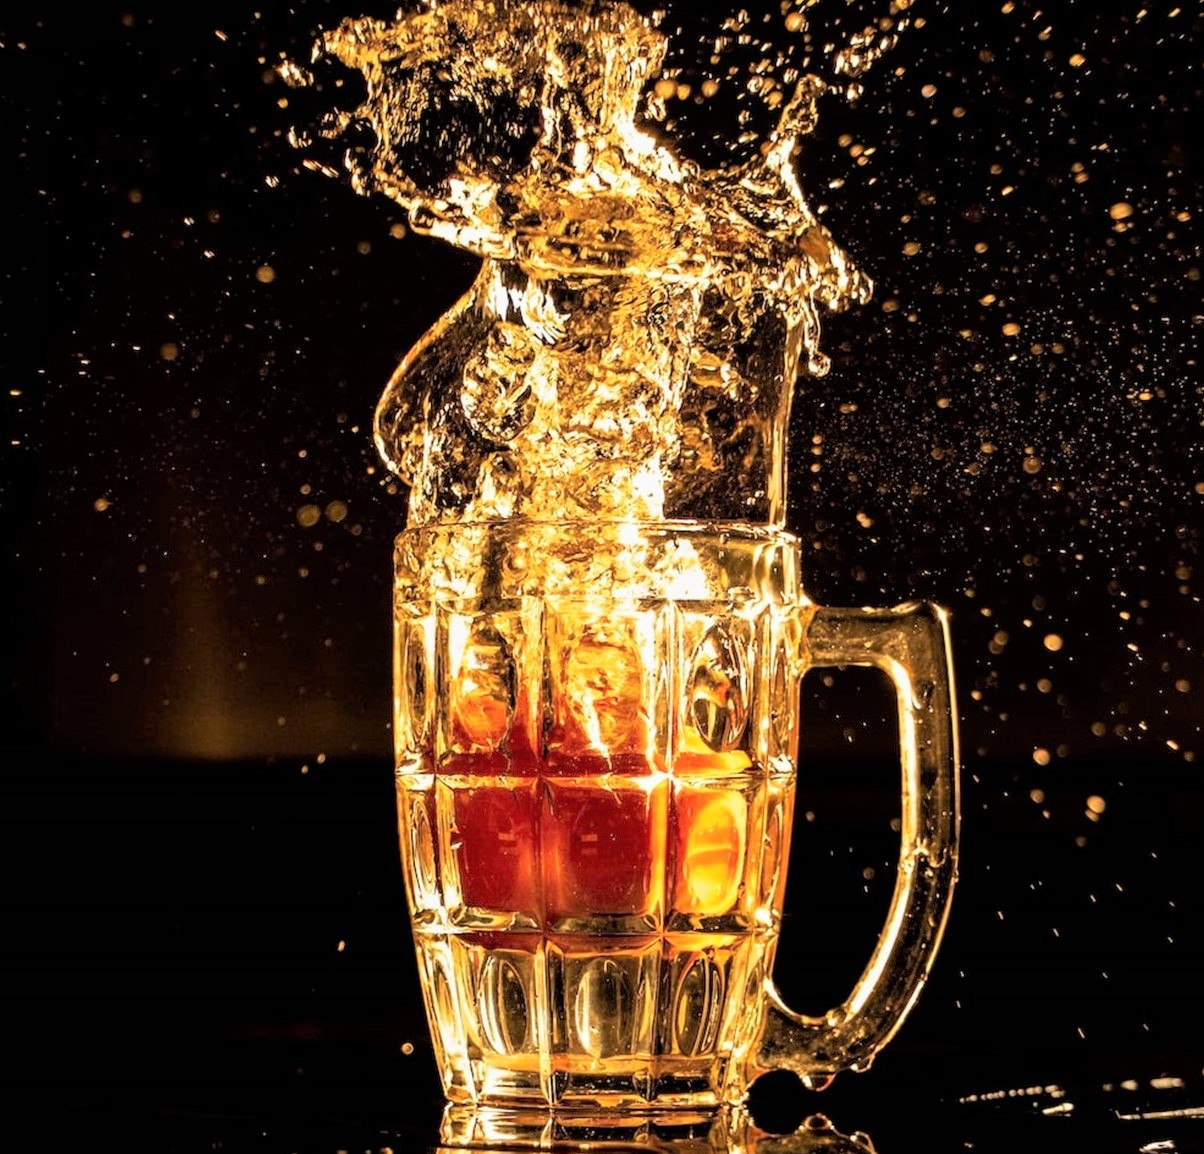 photo of beer splashing out of clear glass mug